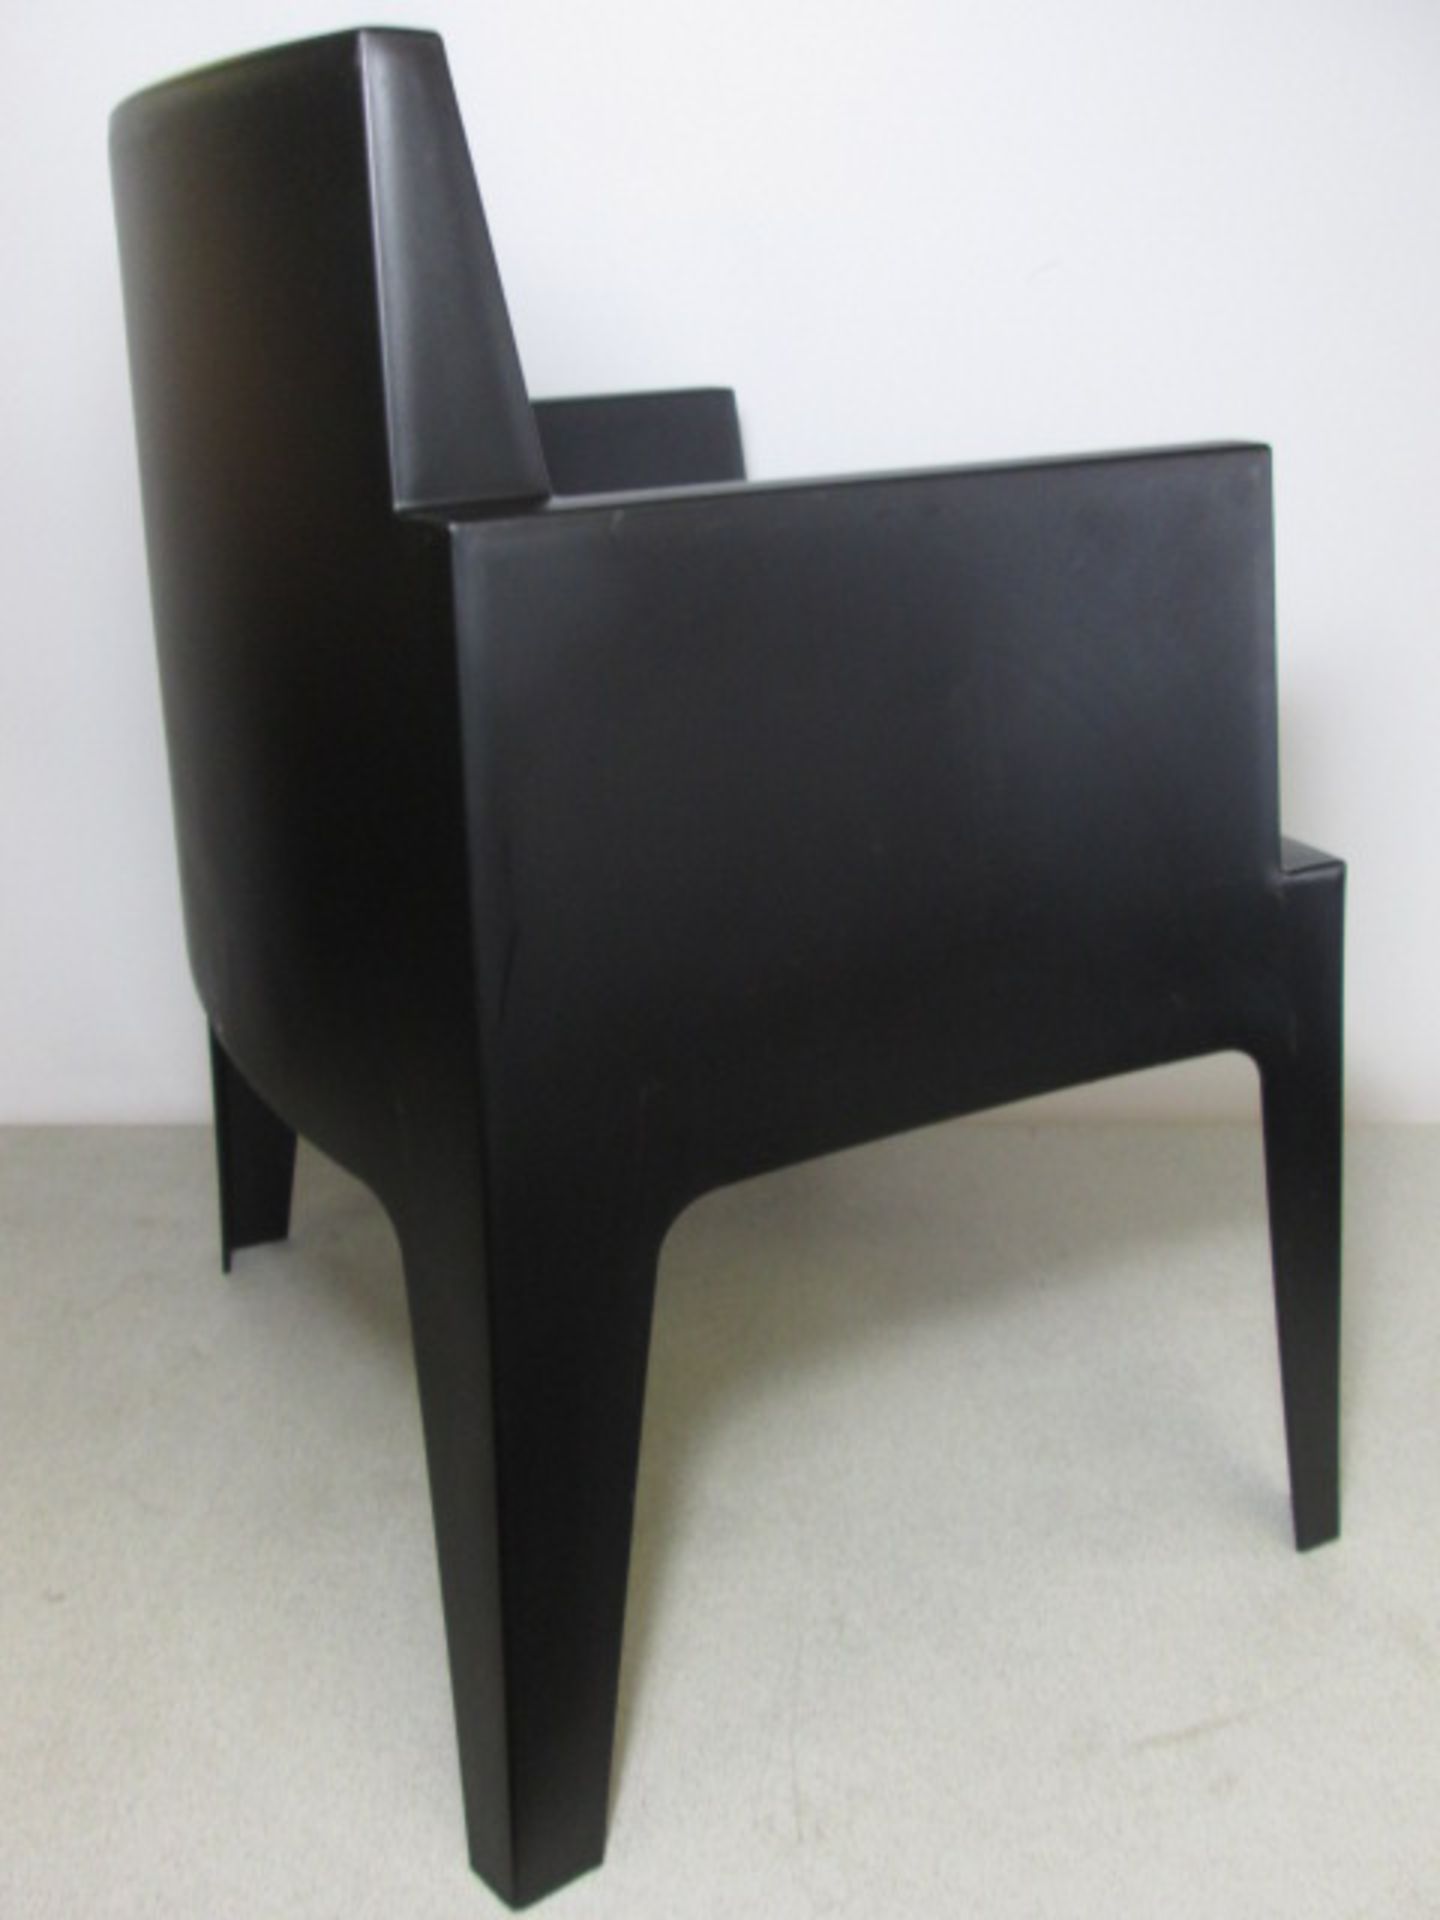 4 x Siesta Recyclable Polypropylene Stacking Outdoor Armchair in Matt Black, Model 058 Box. Comes - Image 7 of 9